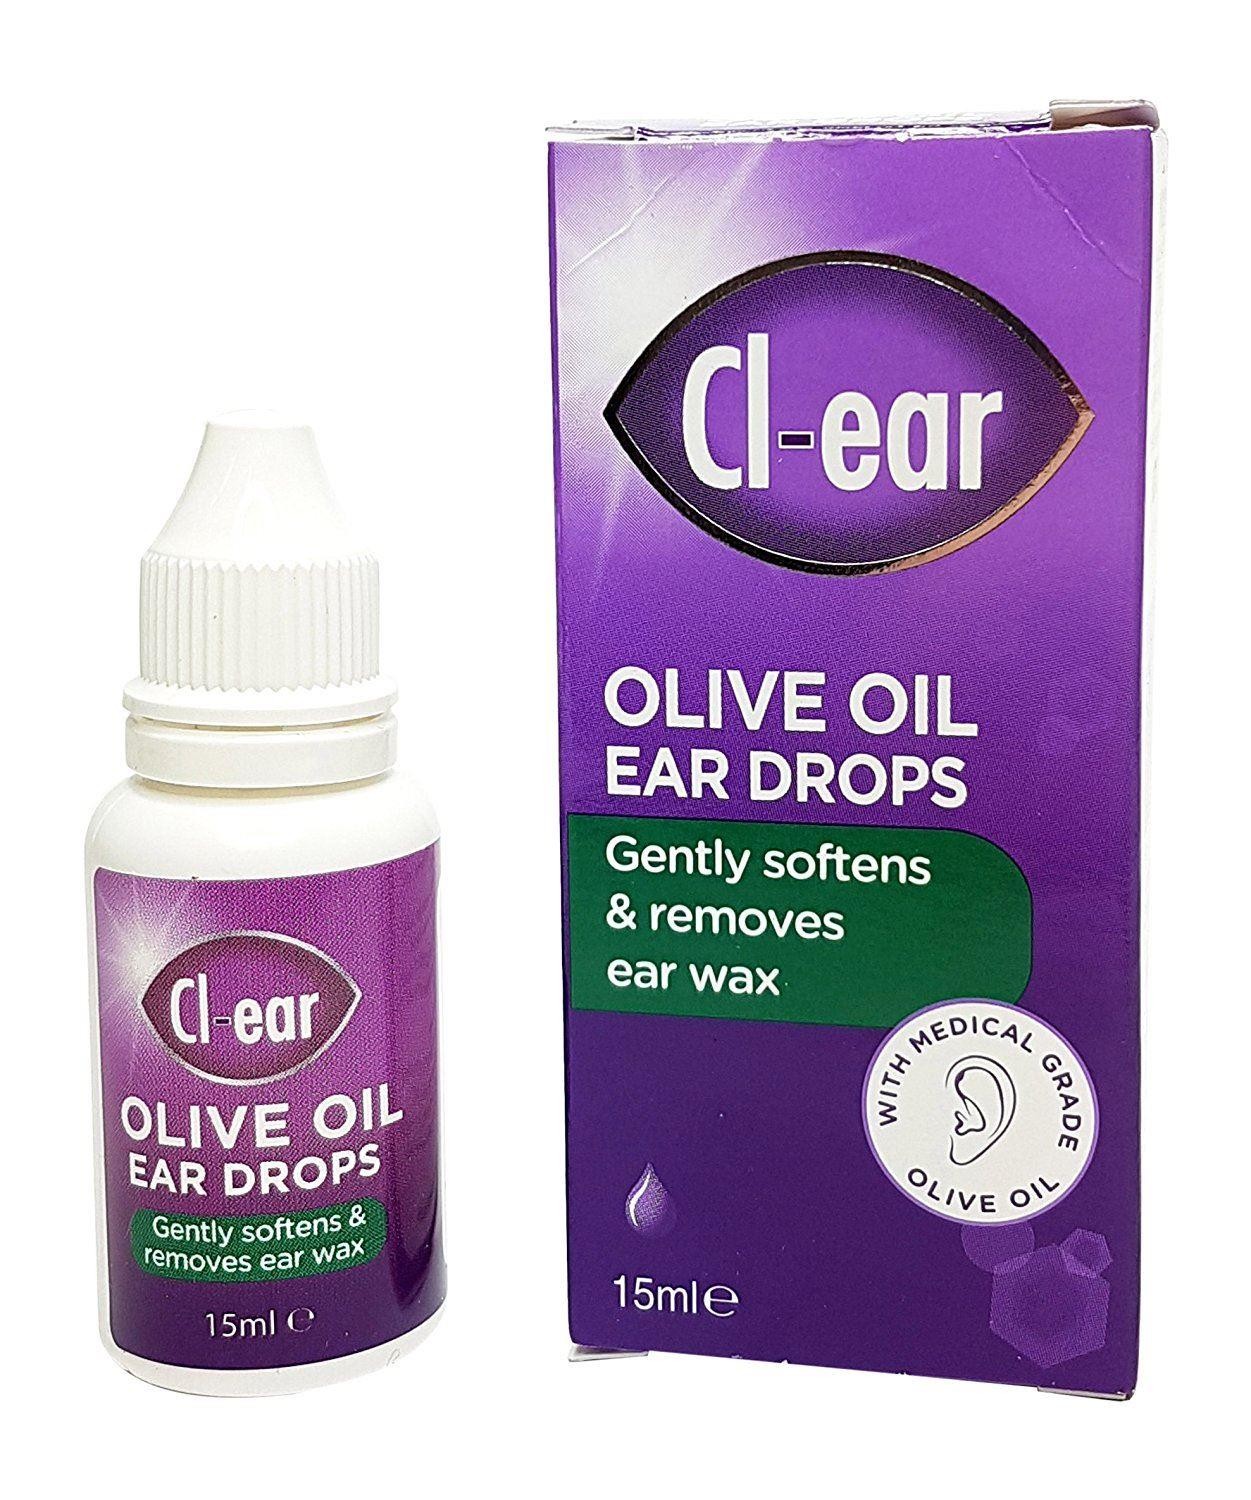 Cl-ear Olive Oil Drops 15ml - Over The Counter